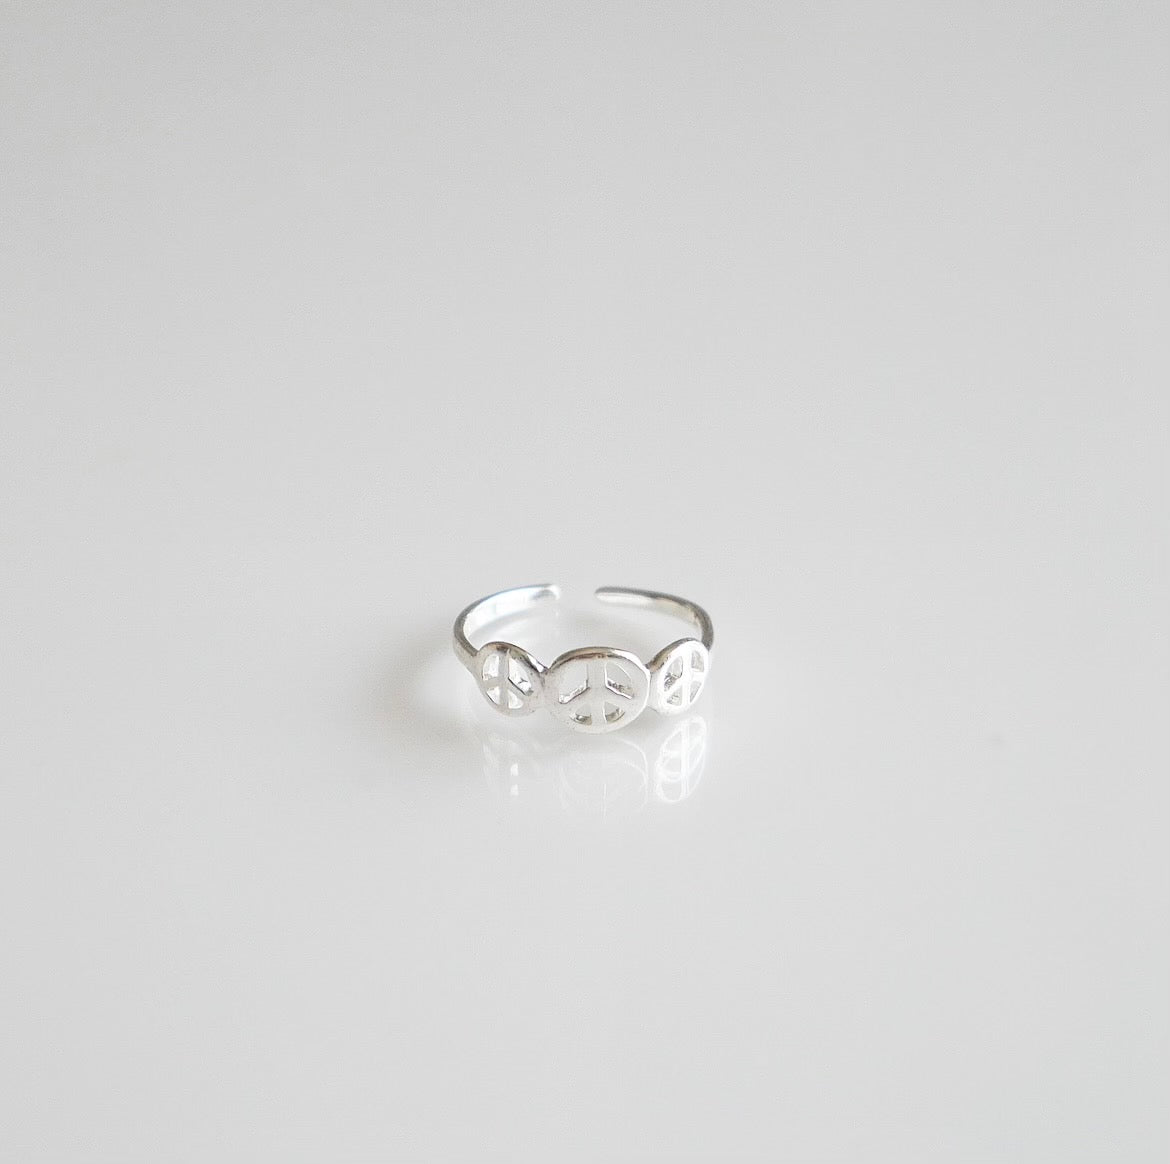 Triple Peace Sign Adjustable Toe Ring .925 sterling silver